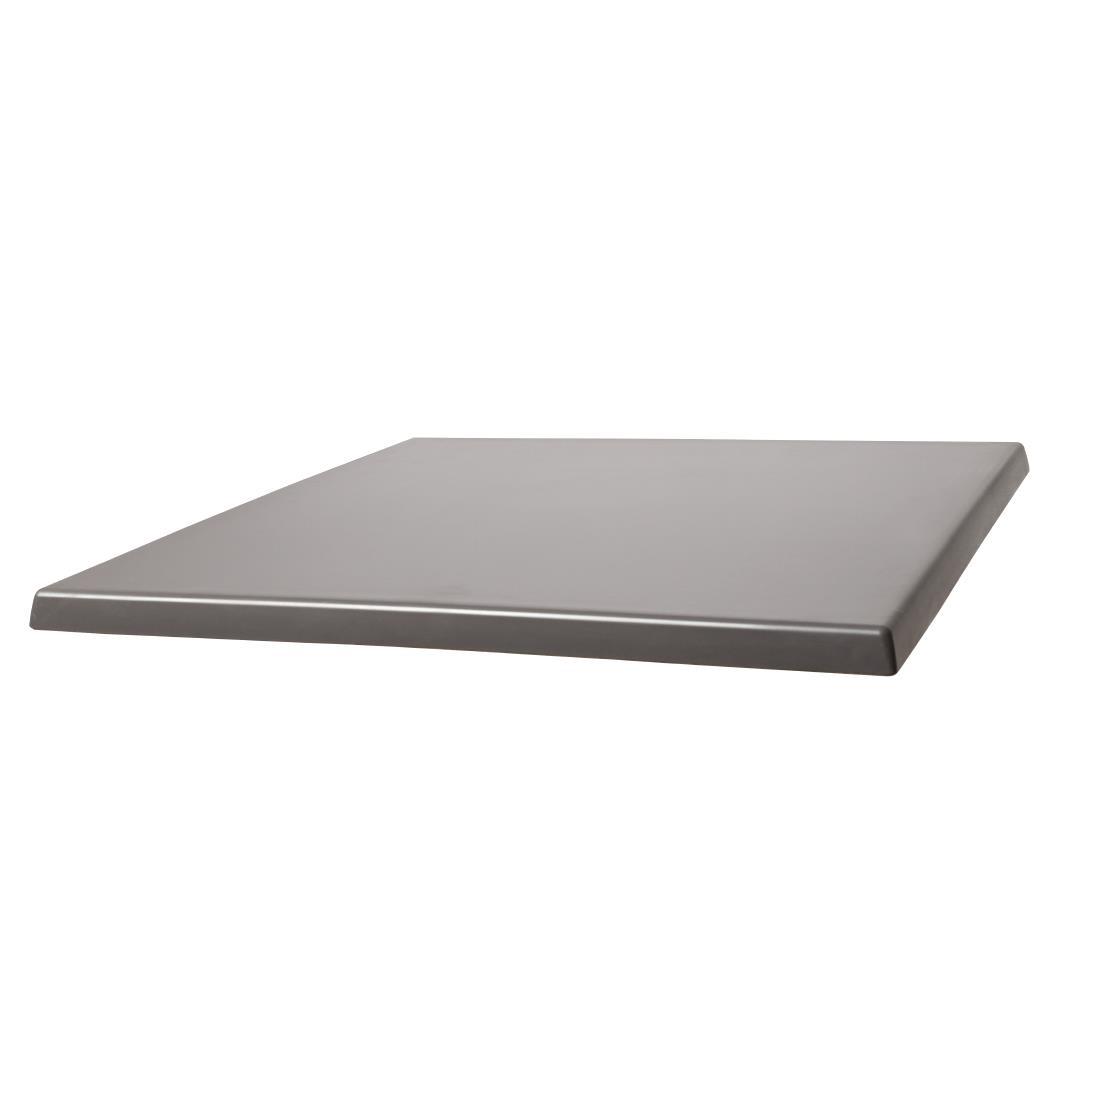 Werzalit Pre-drilled Square Table Top  Dark Grey 700mm - GR636  - 2